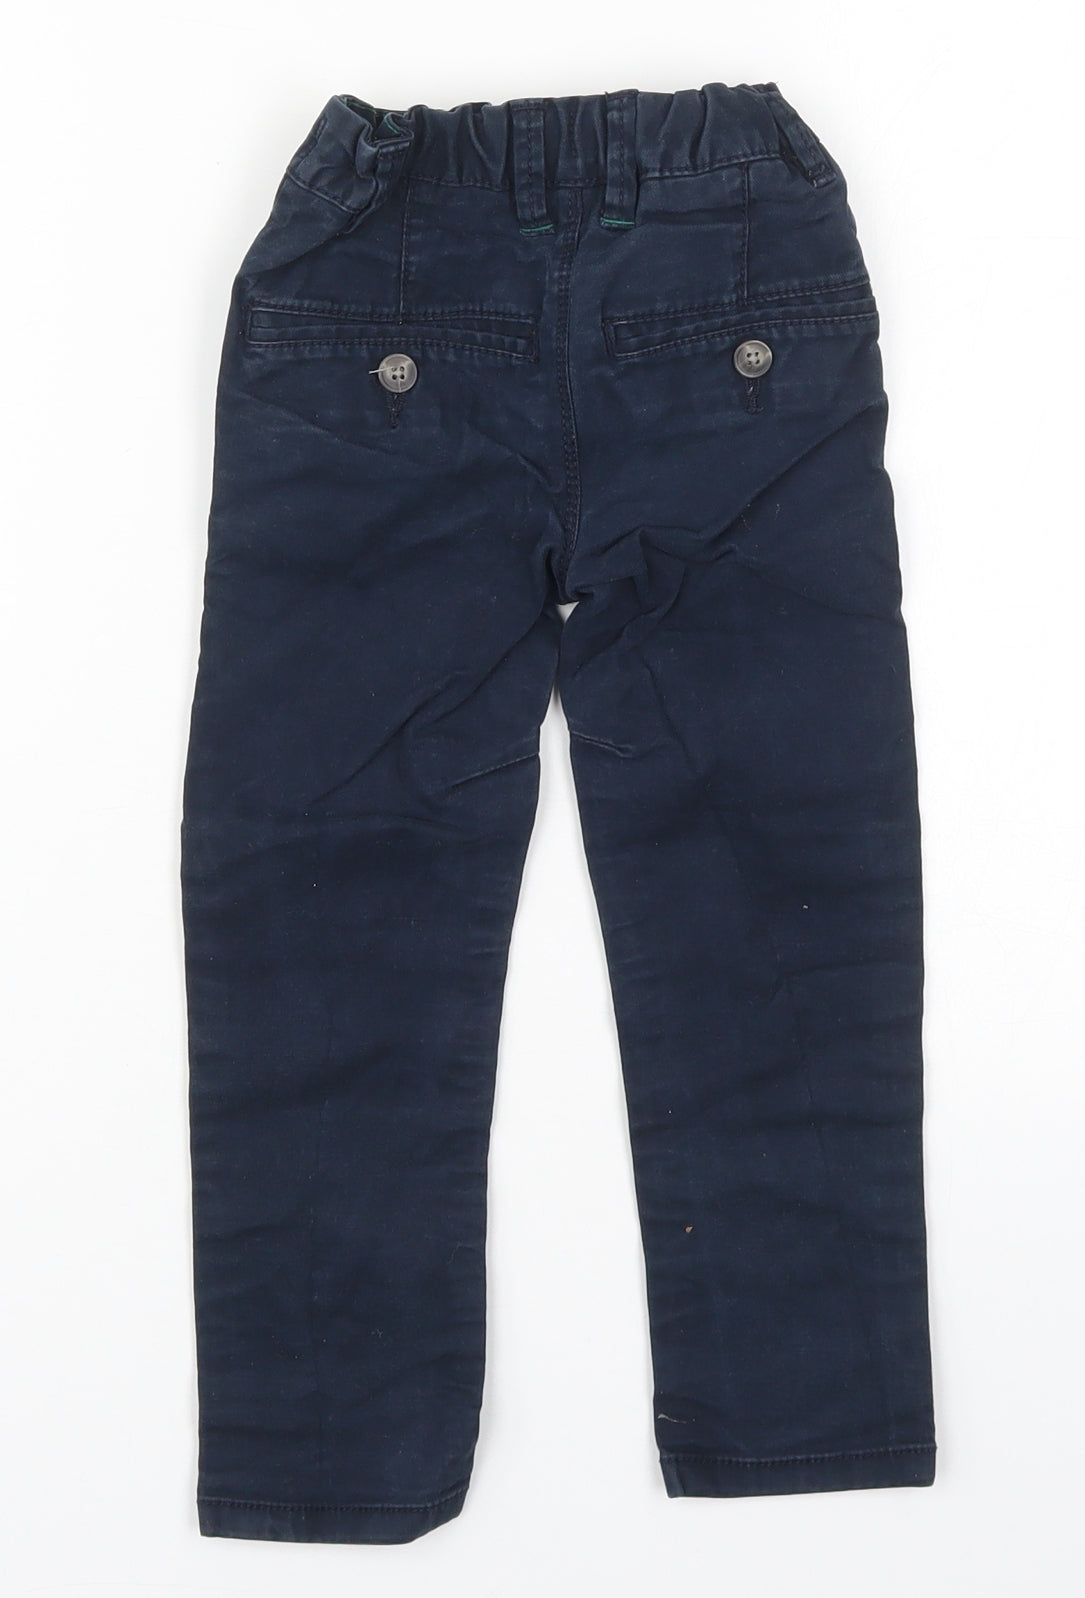 NEXT Boys Blue  Cotton Chino Trousers Size 3 Years  Regular Button